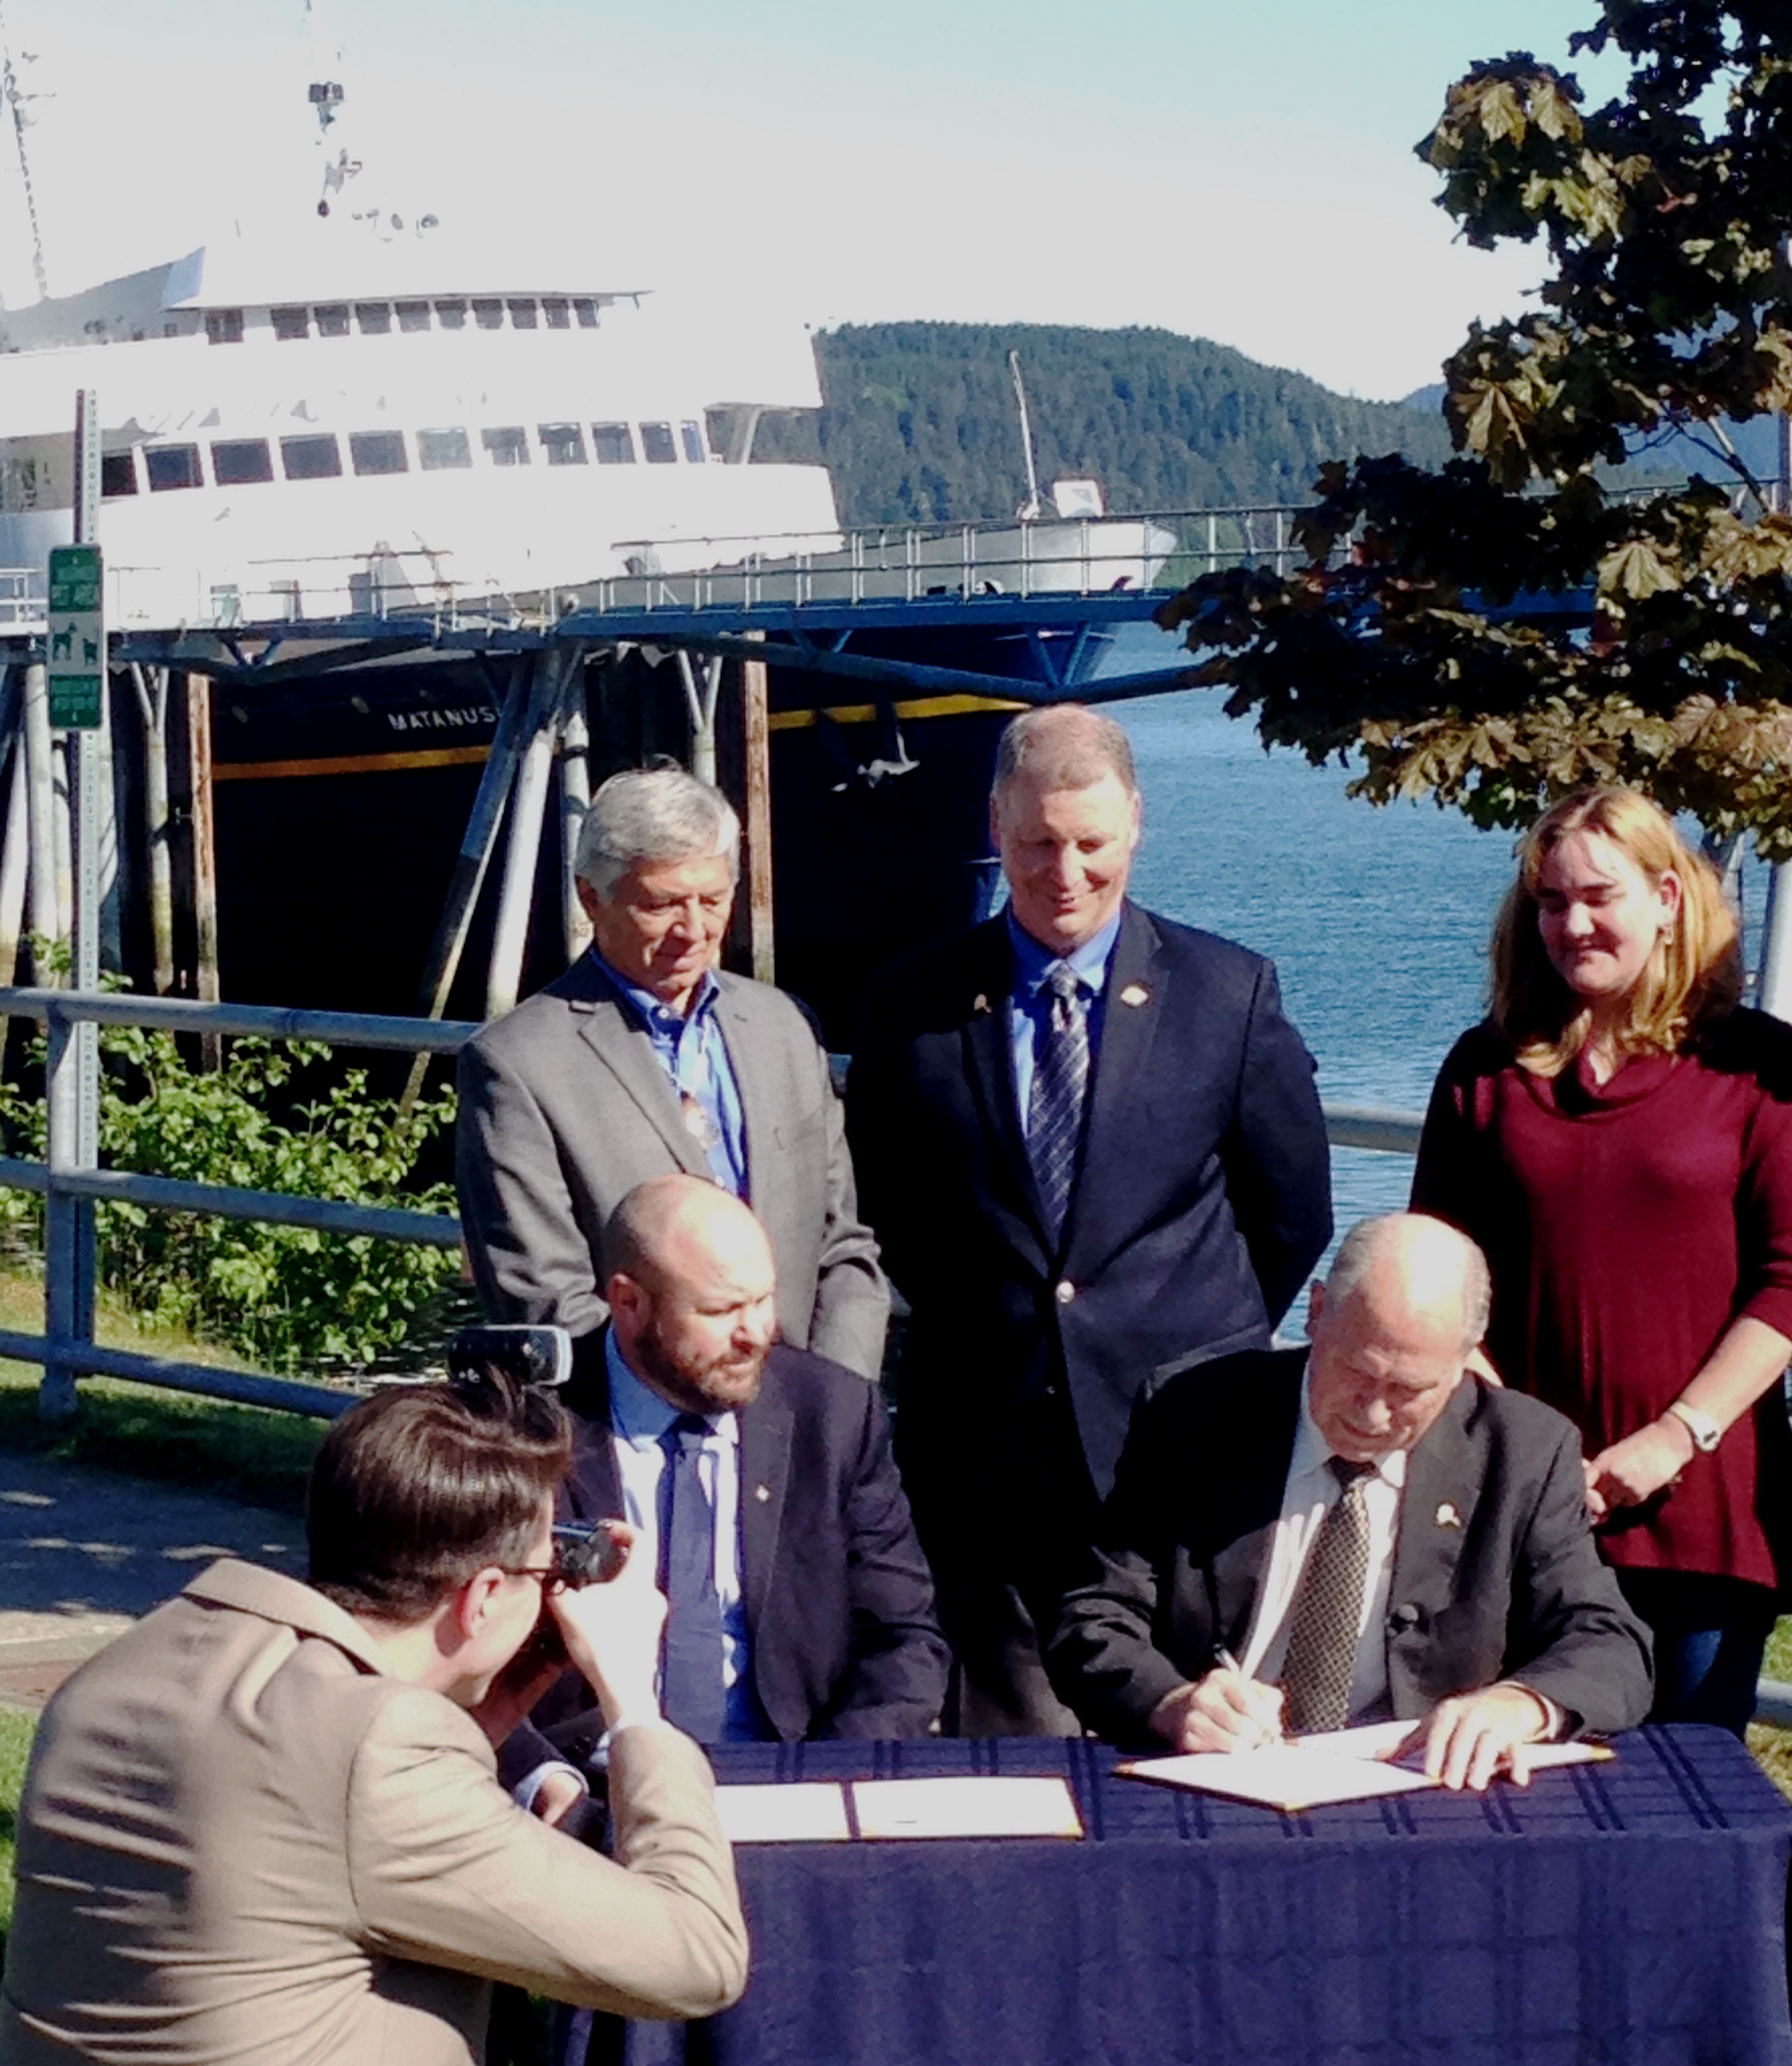 Gov. Bill Walker signs a memorandum of understanding with the Southeast Conference as its President, Gary White,and others watch Thursday at the Auke Bay Ferry Terminal. (Photo by Ed Schoenfeld, CoastAlaska - Juneau)